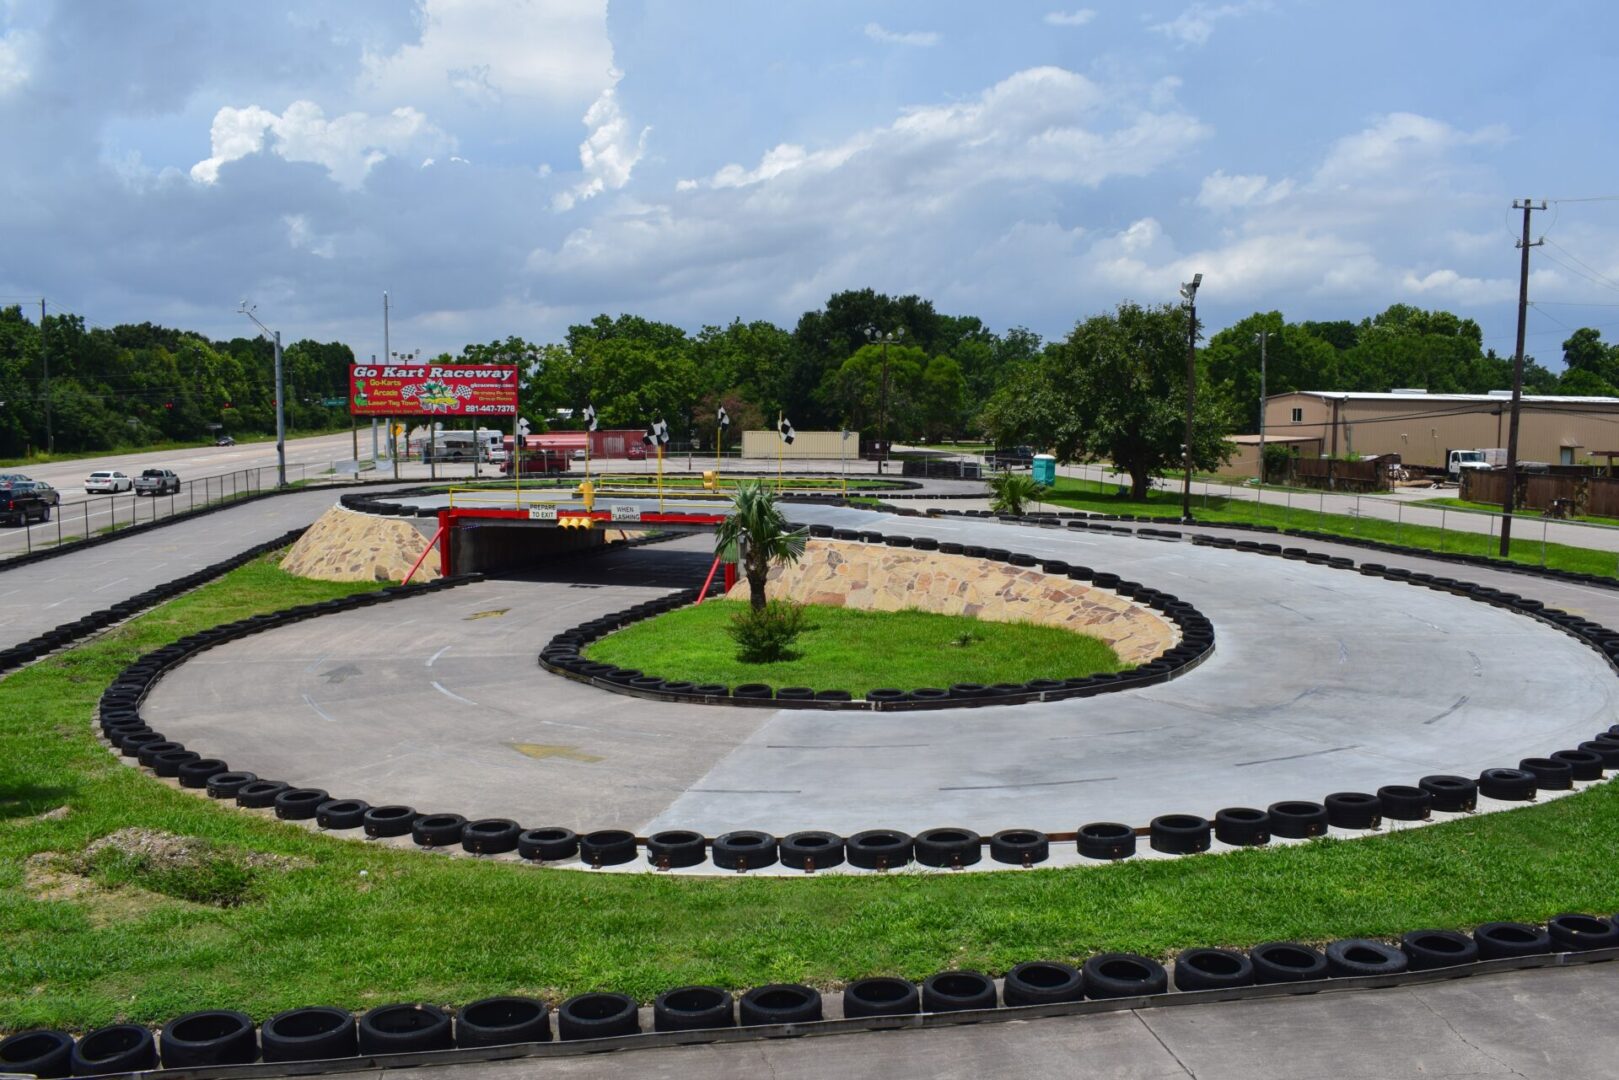 Complete view of go kart racing track with bumpers and underway